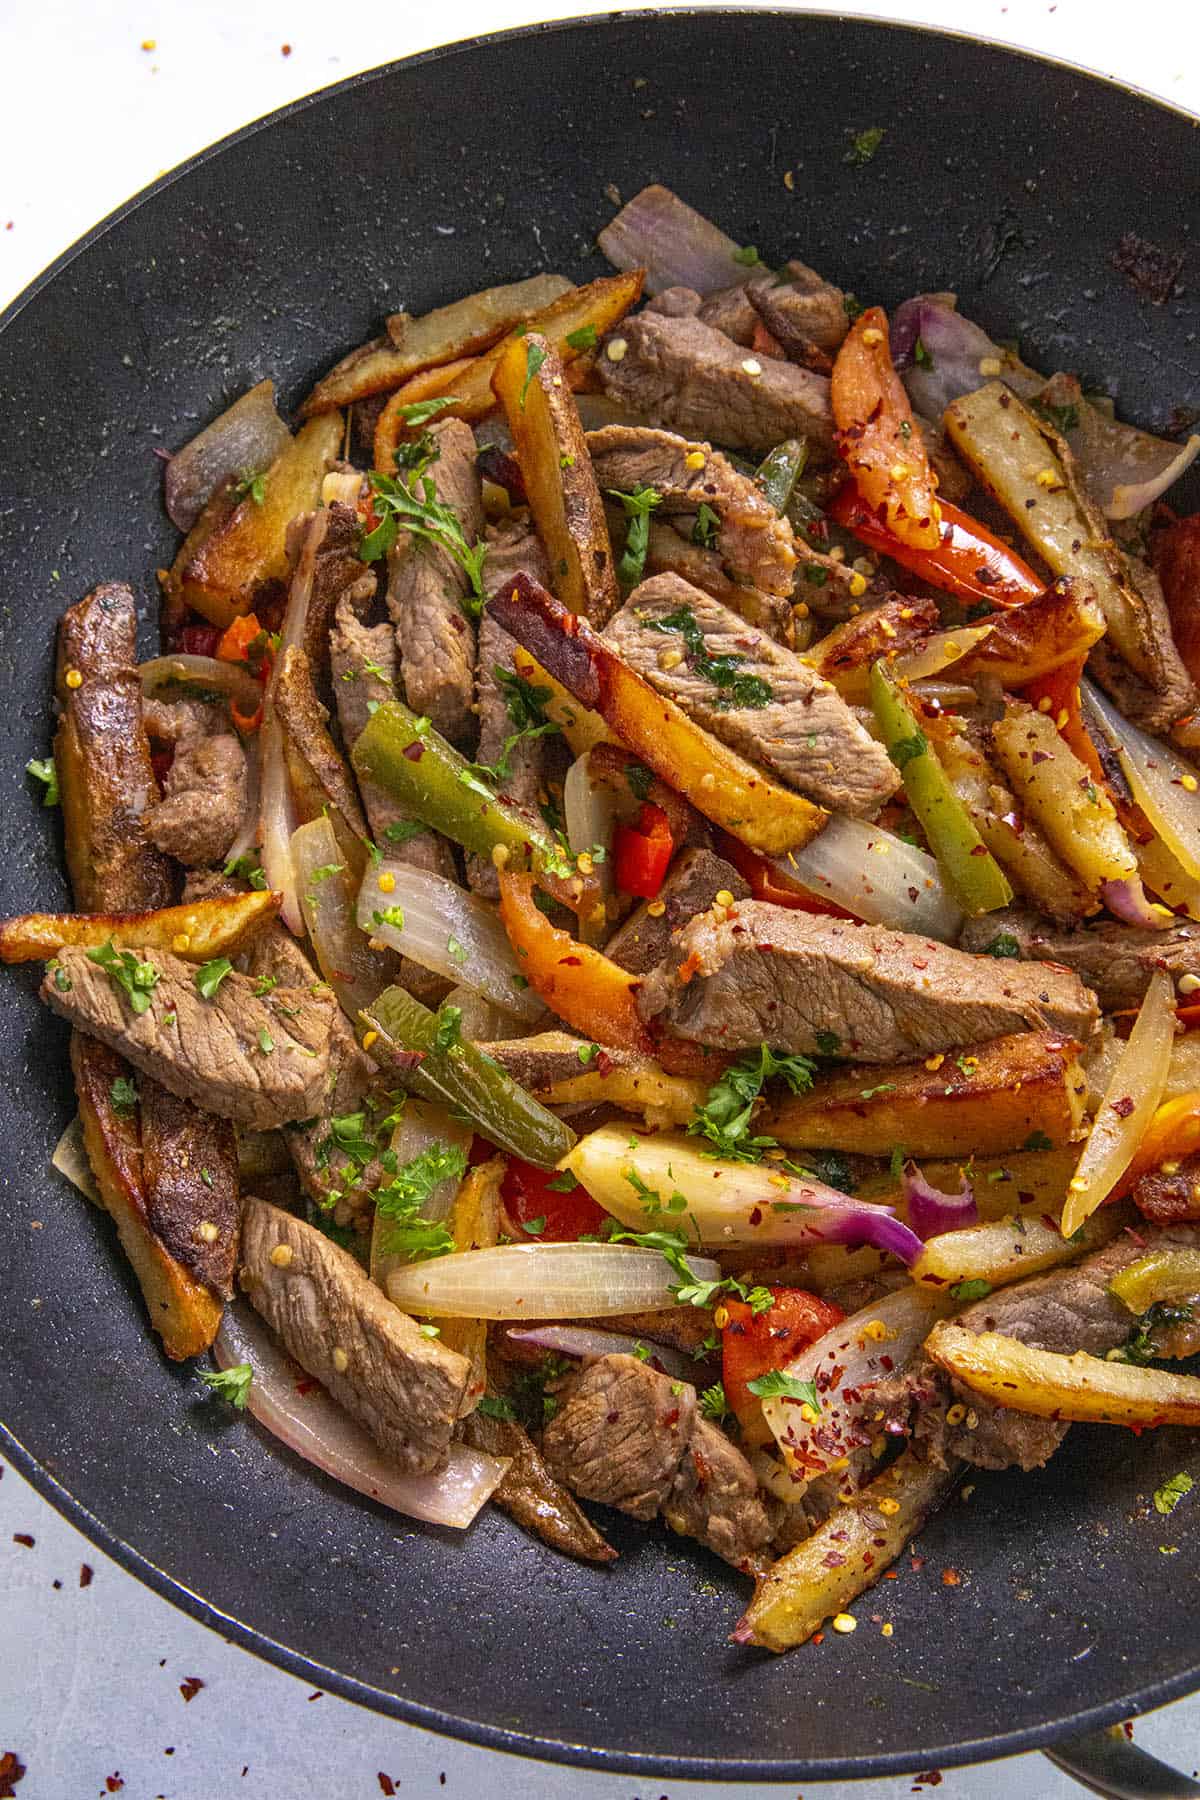 Peruvian Beef Stir Fry with French Fries (Lomo Saltado) in a pan